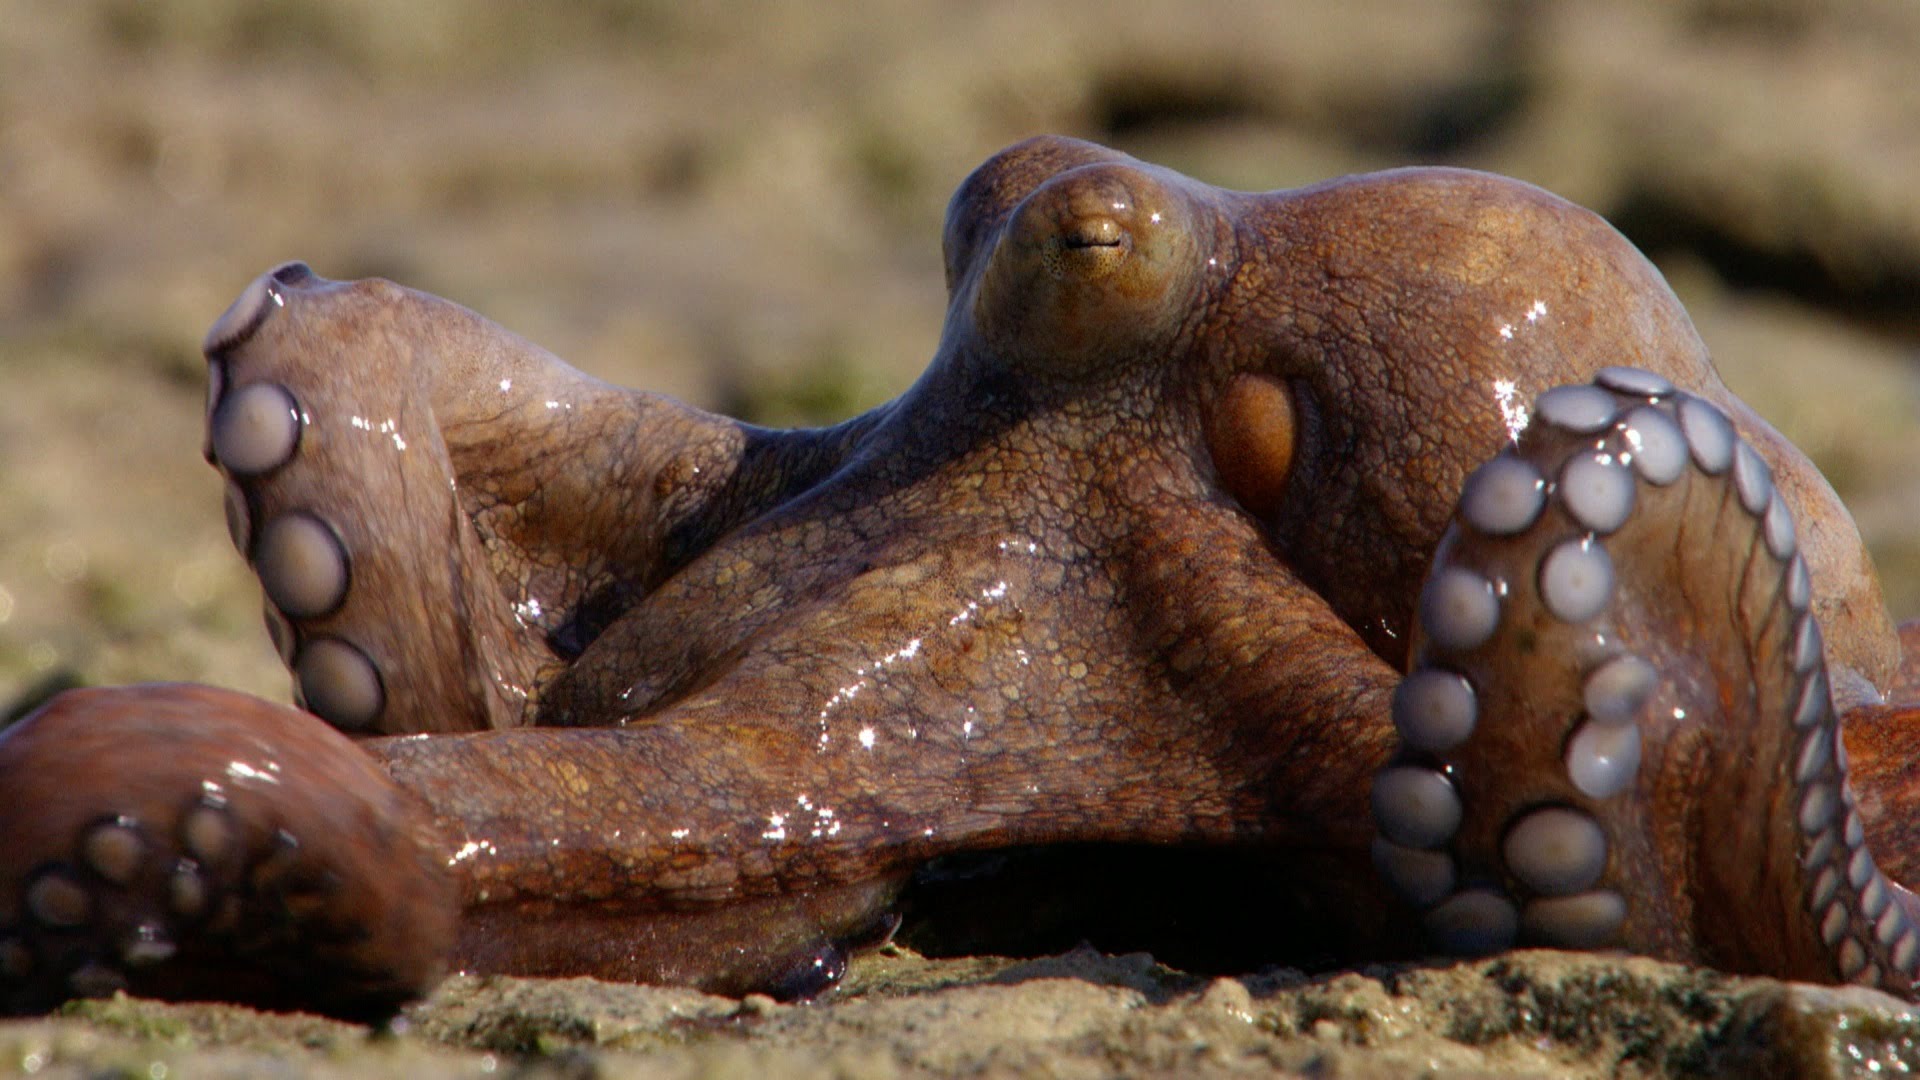 The amazing Octopus that can walk on dry land - The Hunt: Episode 6 Preview - BBC One